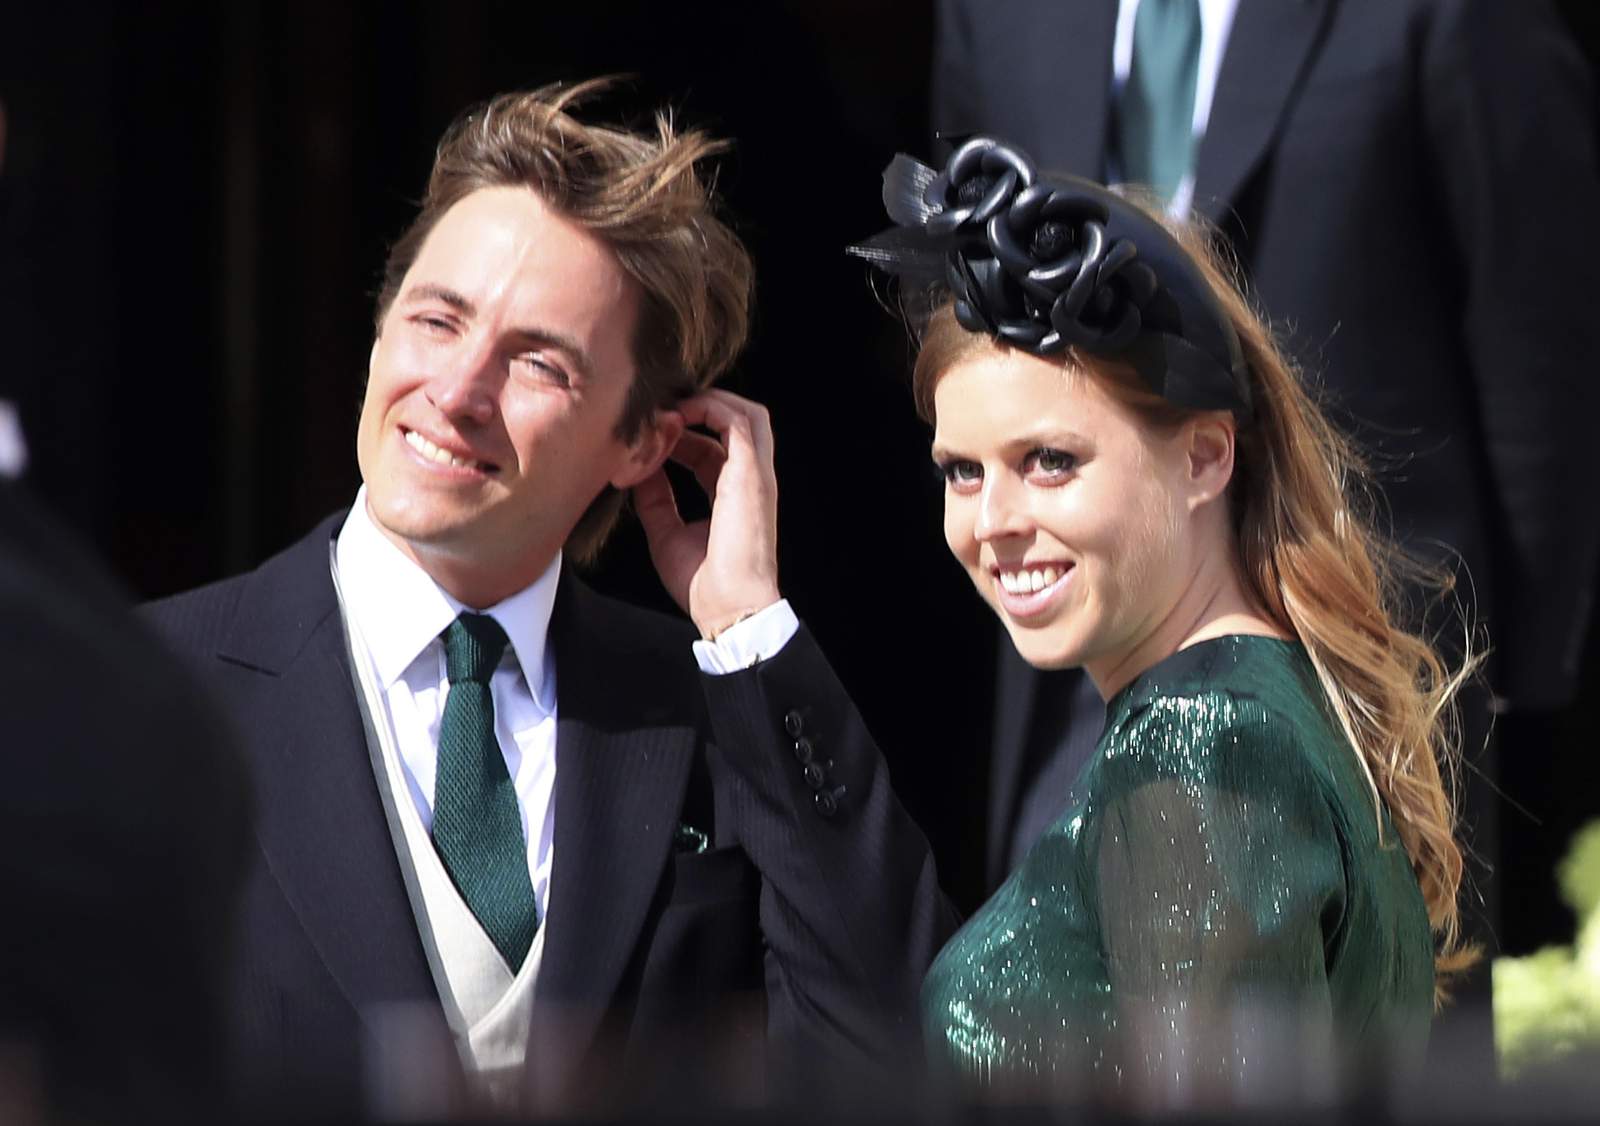 Princess Beatrice marries in private ceremony at Windsor